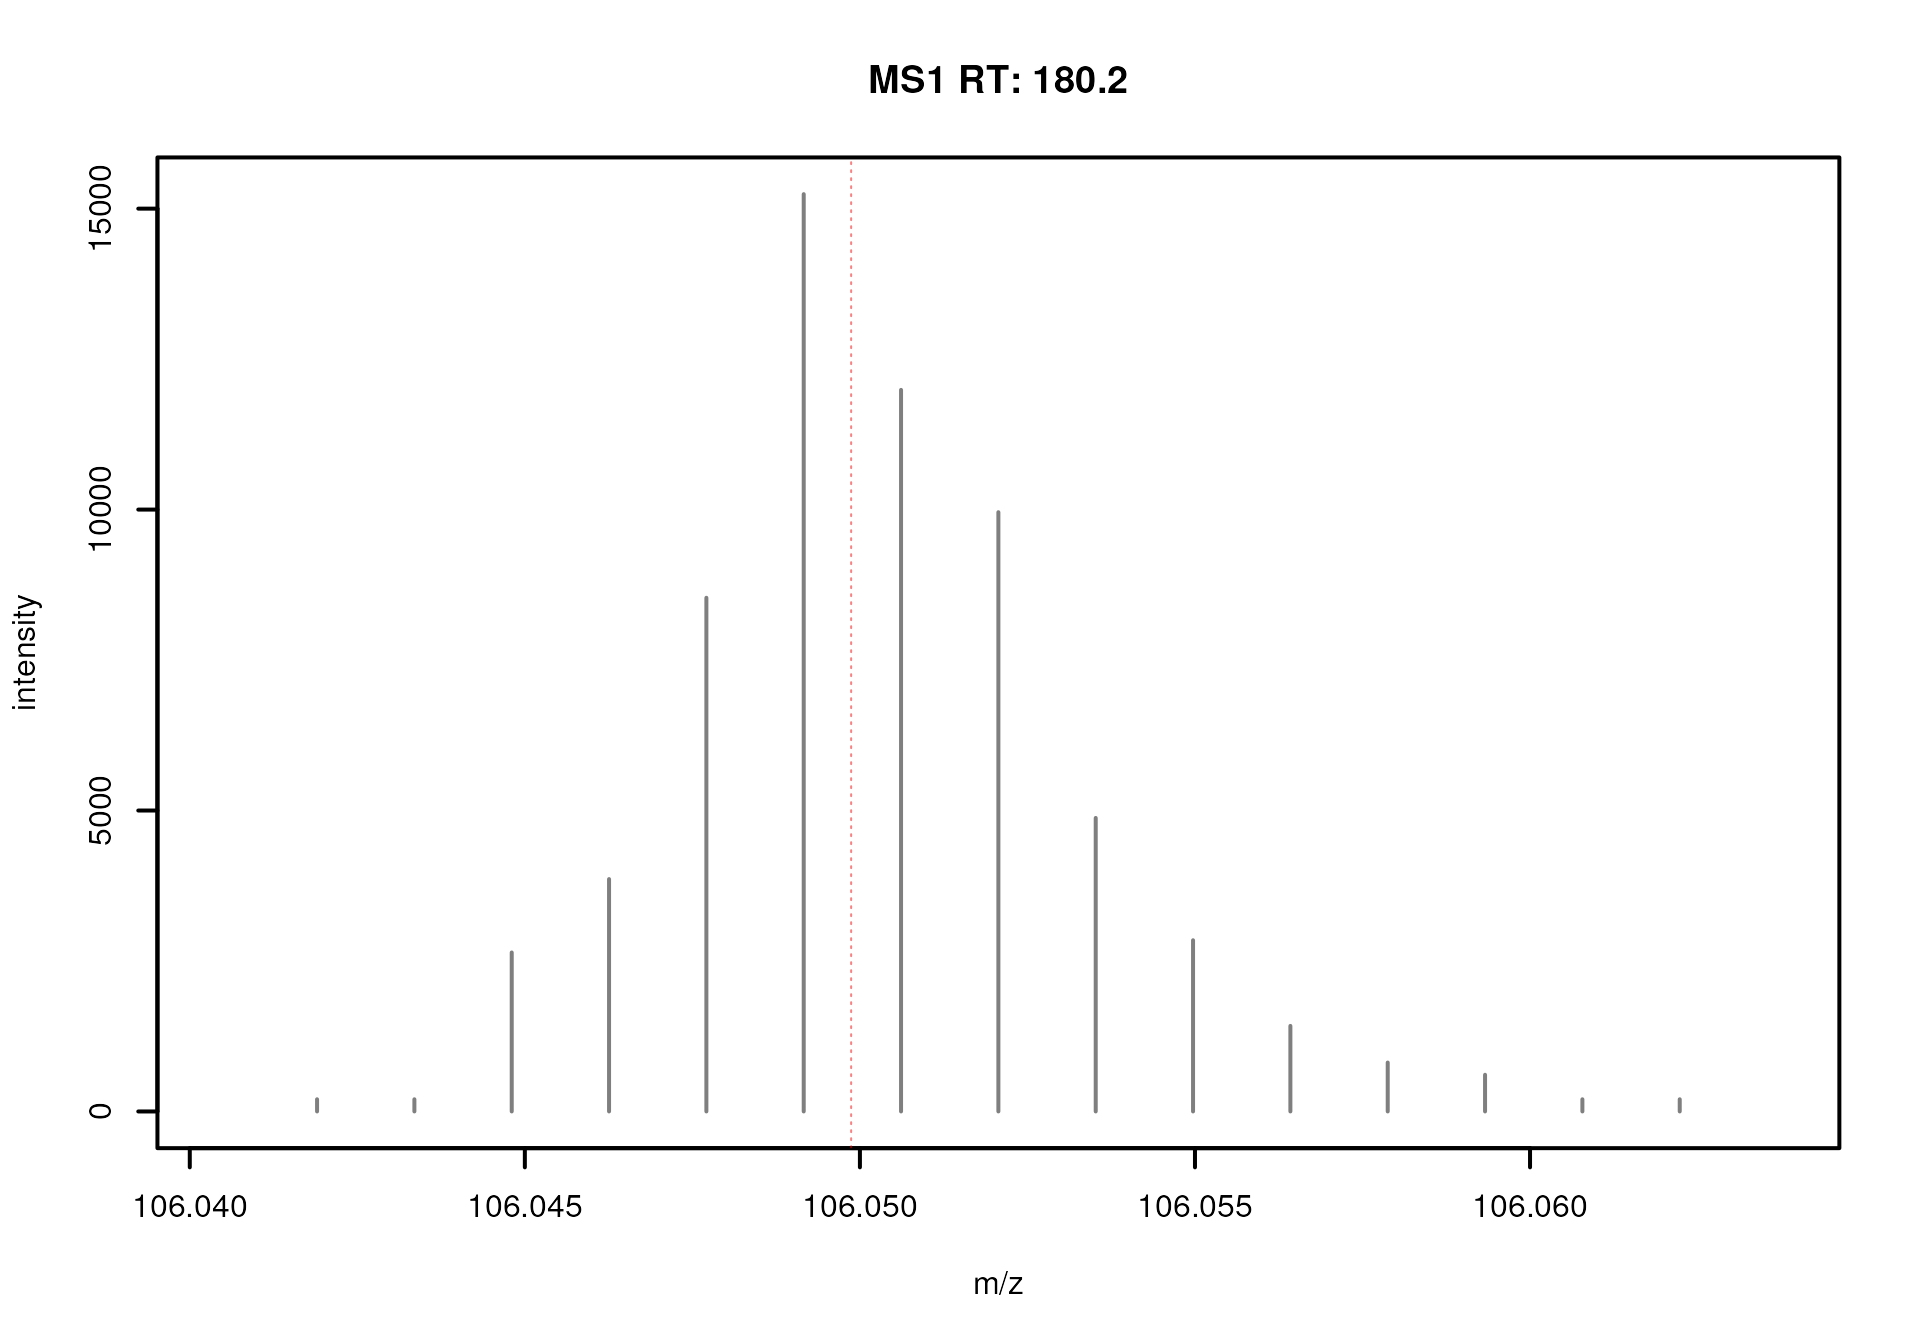 Profile-mode mass peak for the [M+H]+ ion of serine. The theoretical *m/z* of that ion is indicated with a dotted red line.